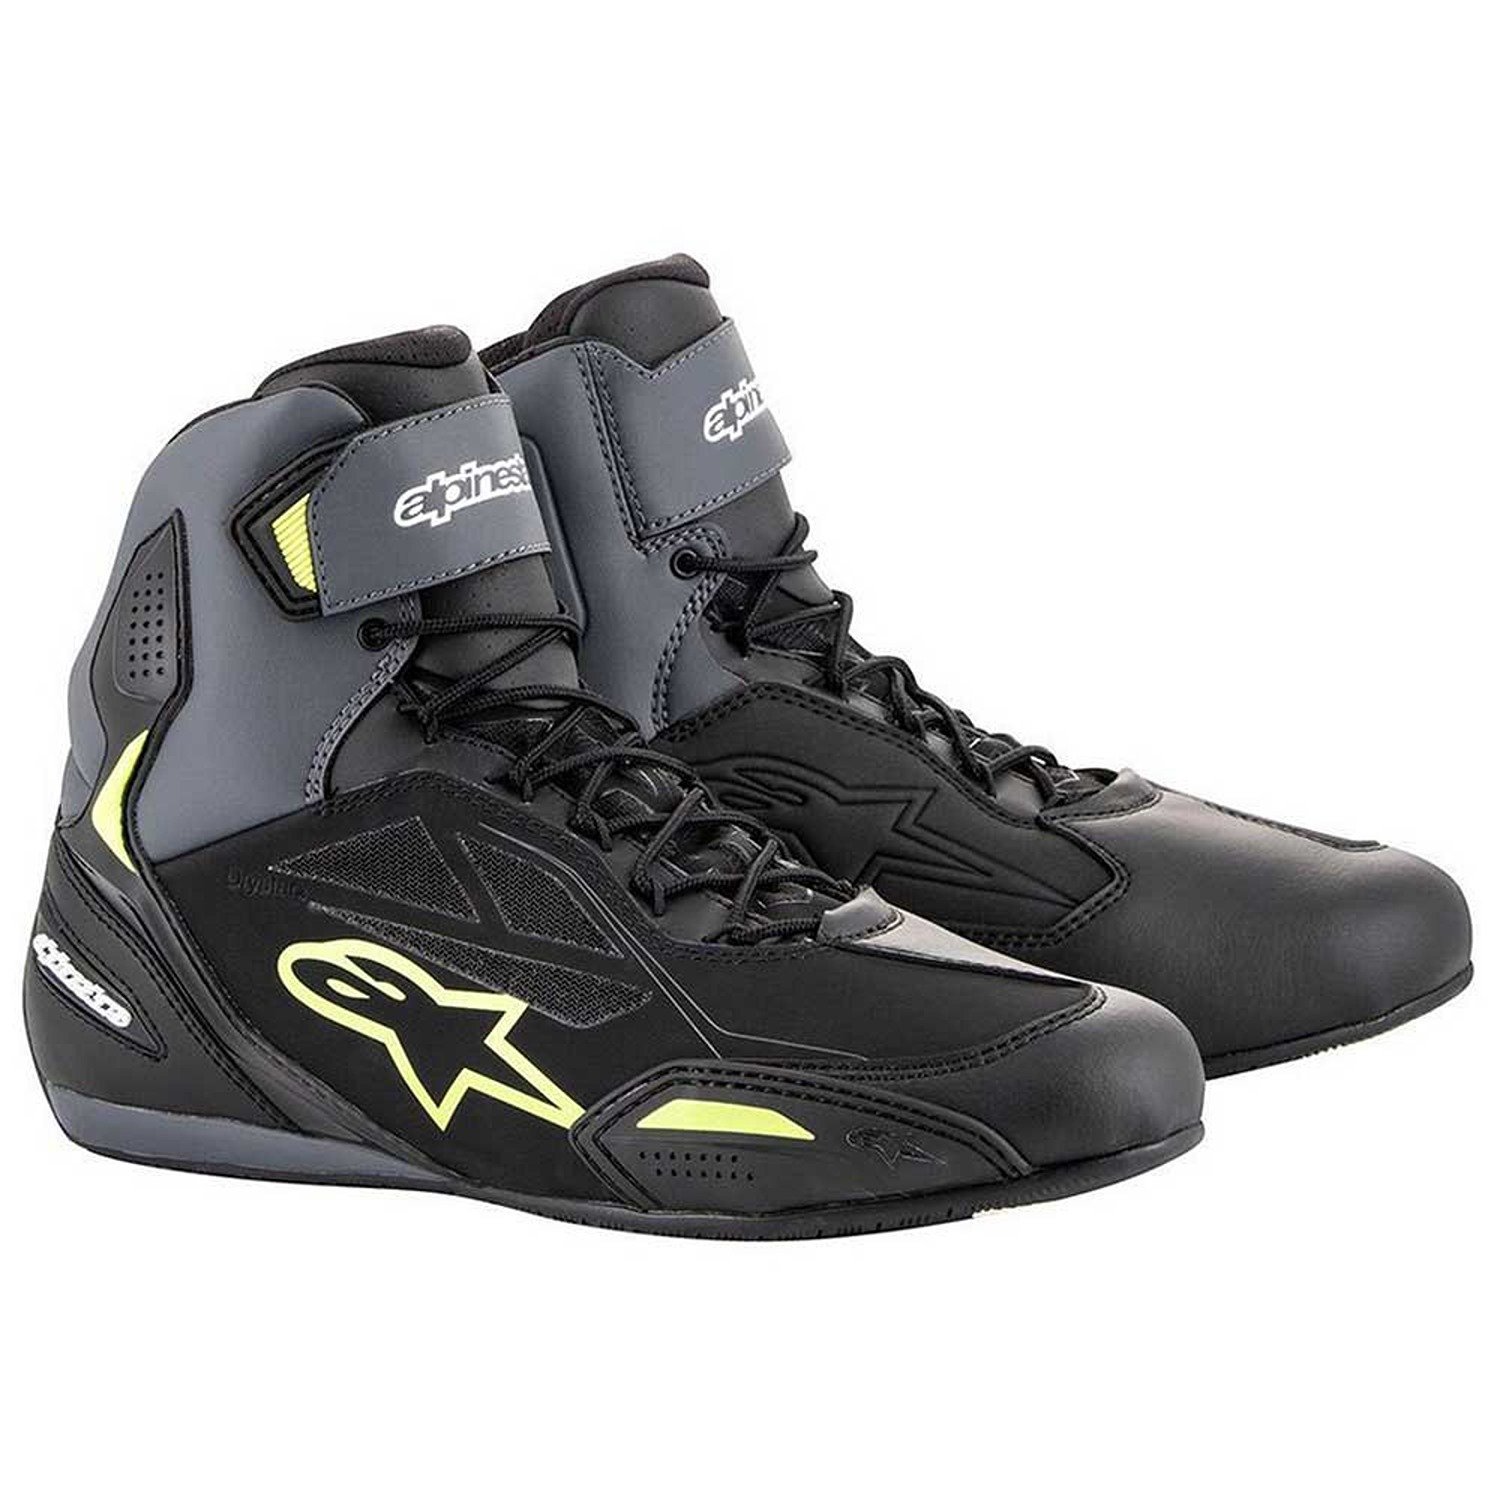 Image of Alpinestars Faster-3 Shoes Black Yellow Fluo Size US 12 EN